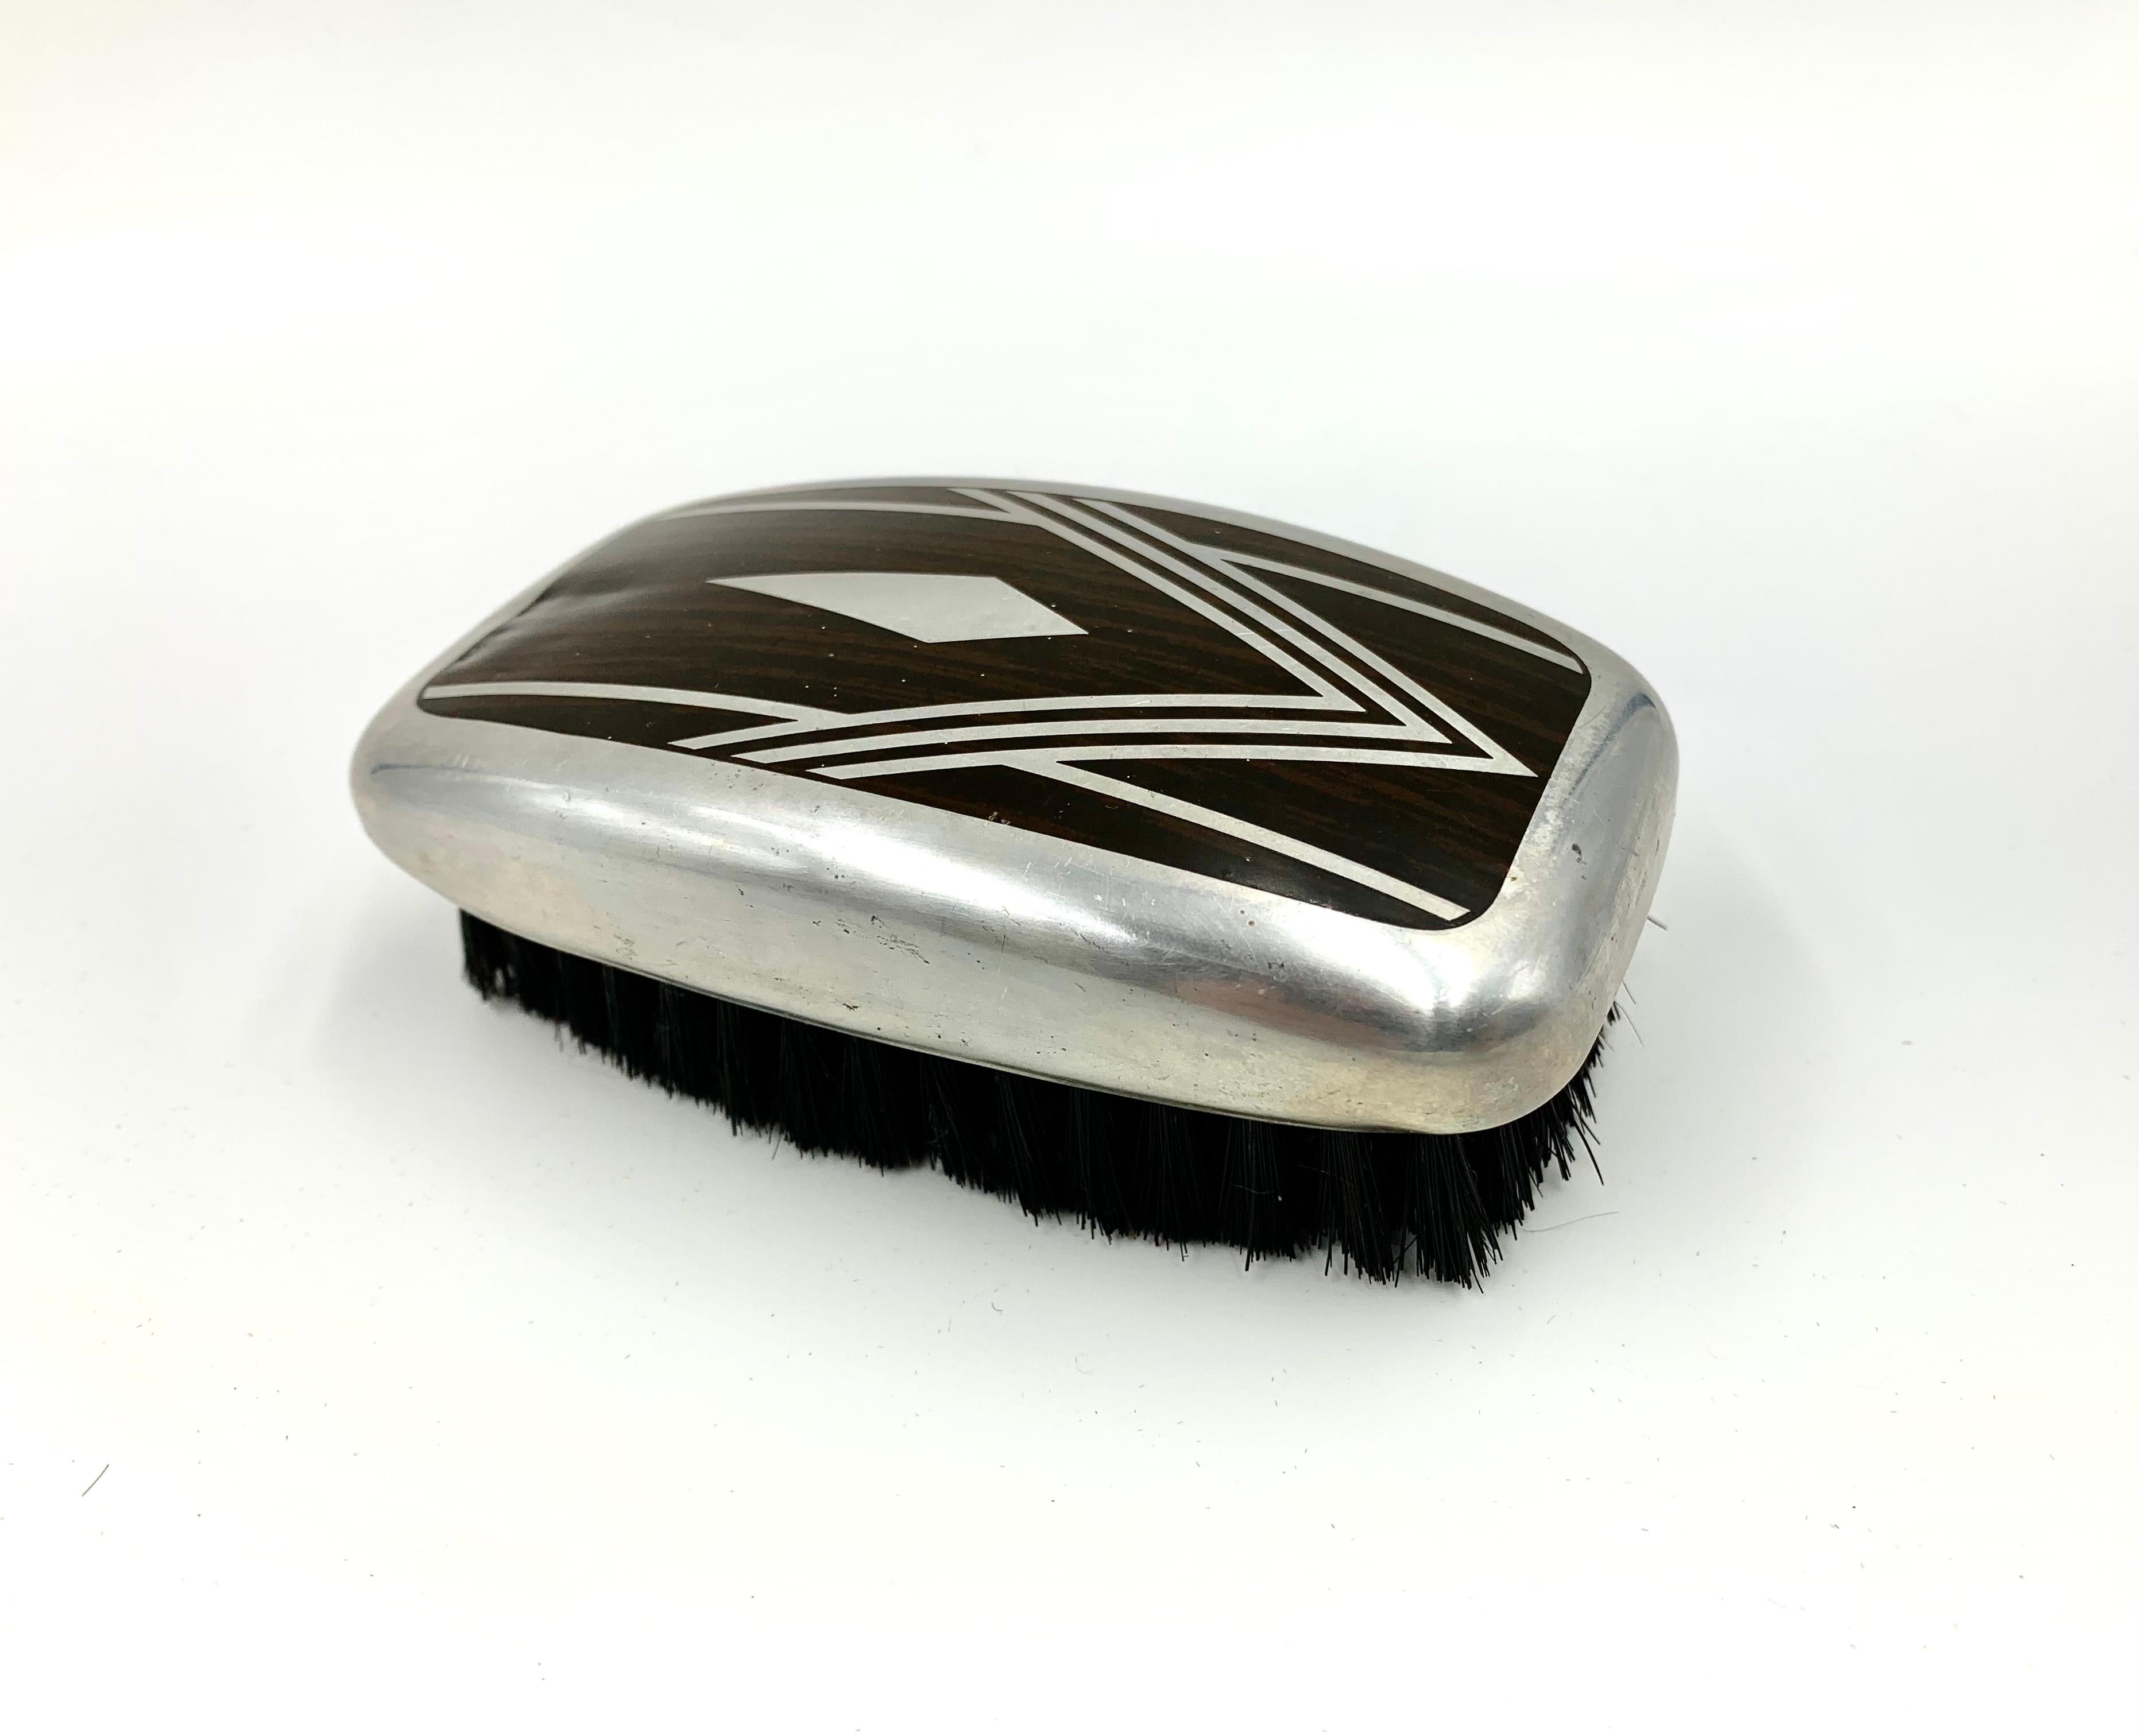 Fabulous Art Deco aluminum inlaid Macassar Ebony faux bois natural boar's hair bristle grooming brush in the manner of Emile-Jacques Rhulmann.
1920s
This stylish accessory would have been used by a gentleman in the early 20th Century. Diamond